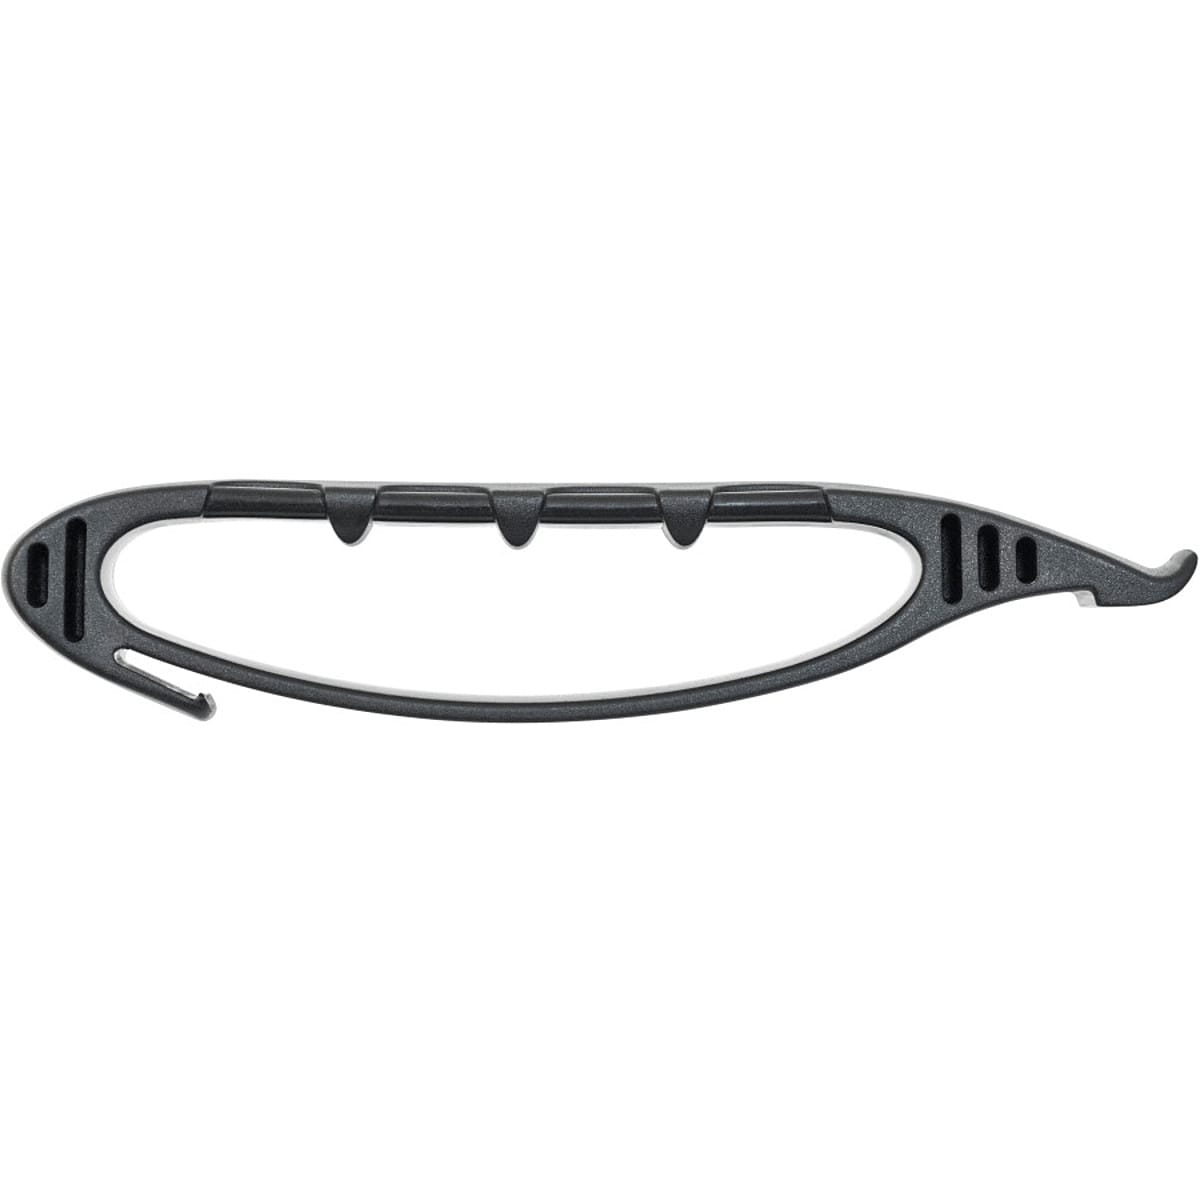 Crank Brothers Speedier Tire Lever Black, One Size